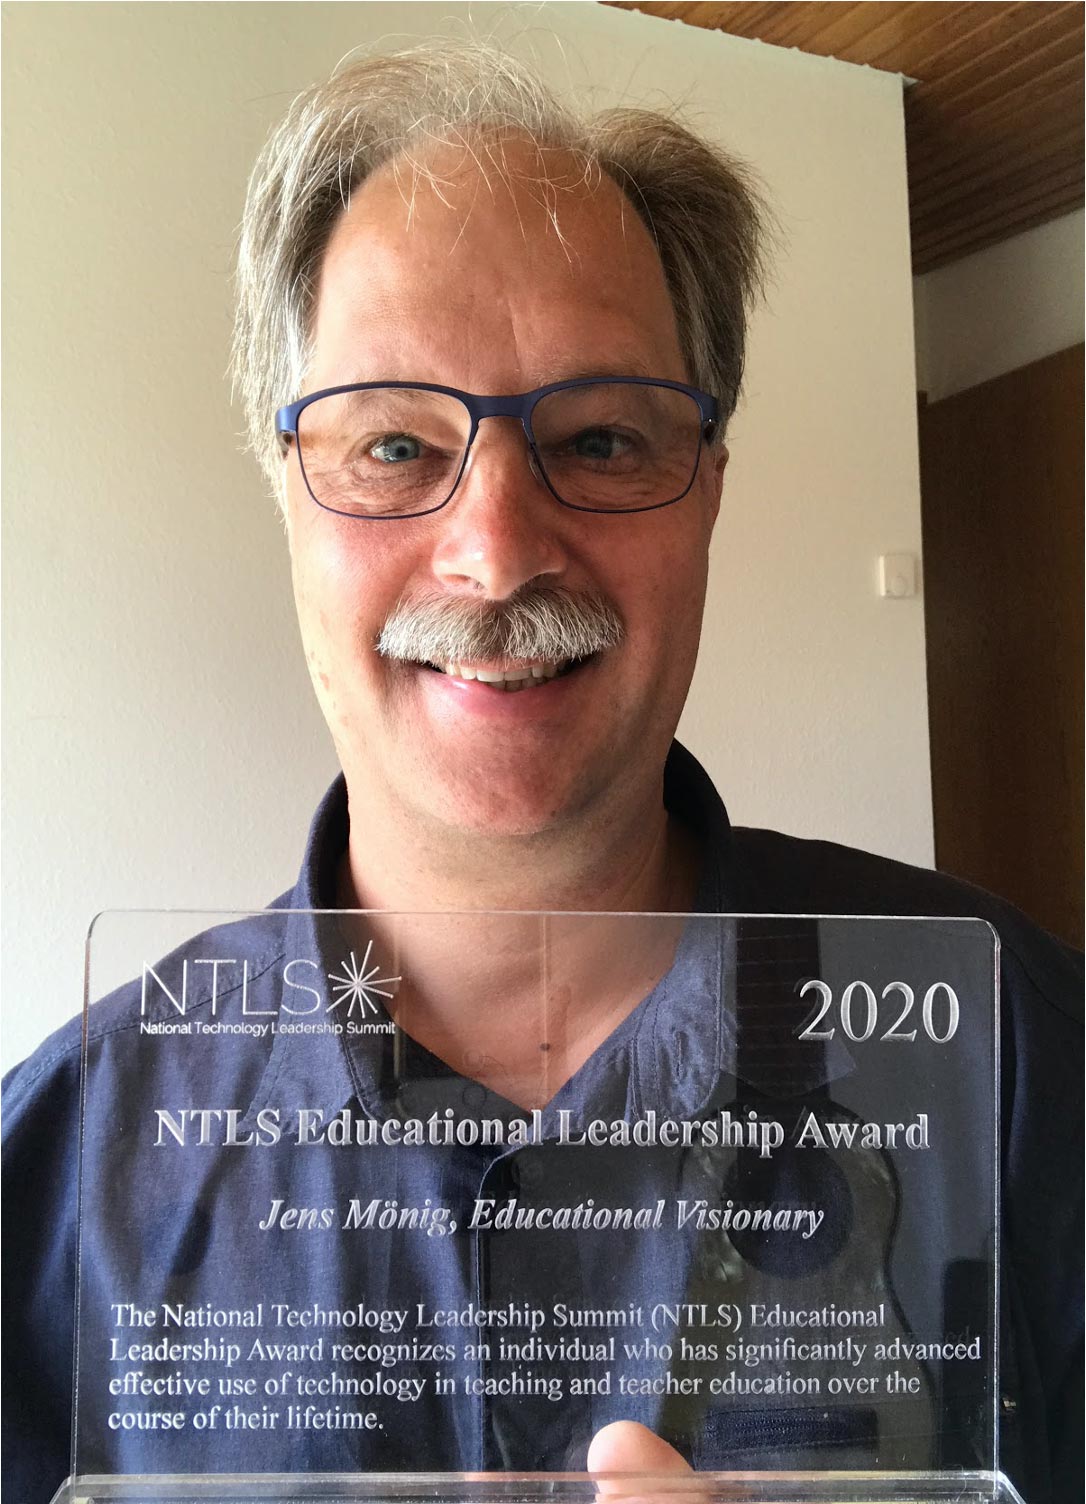 Jens Moenig pictured with award